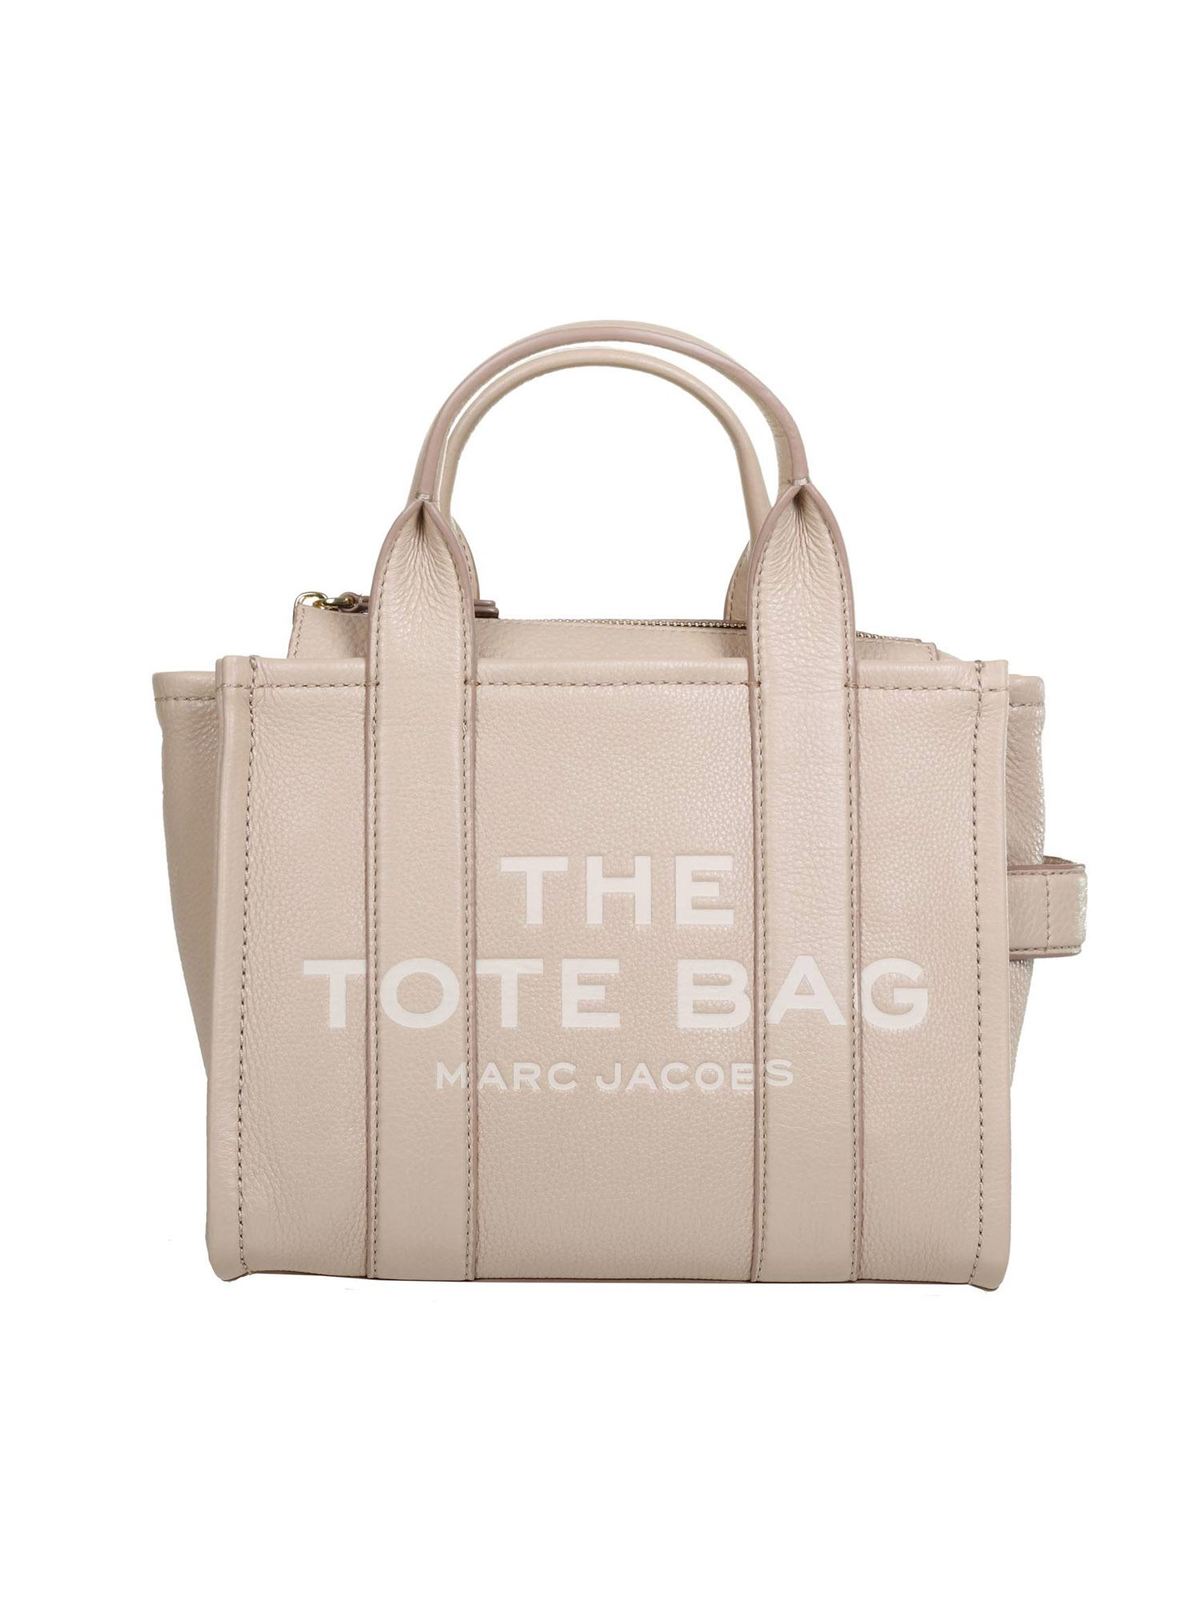 MARC JACOBS MINI TRAVELER TOTE BAG IN TWINE colour